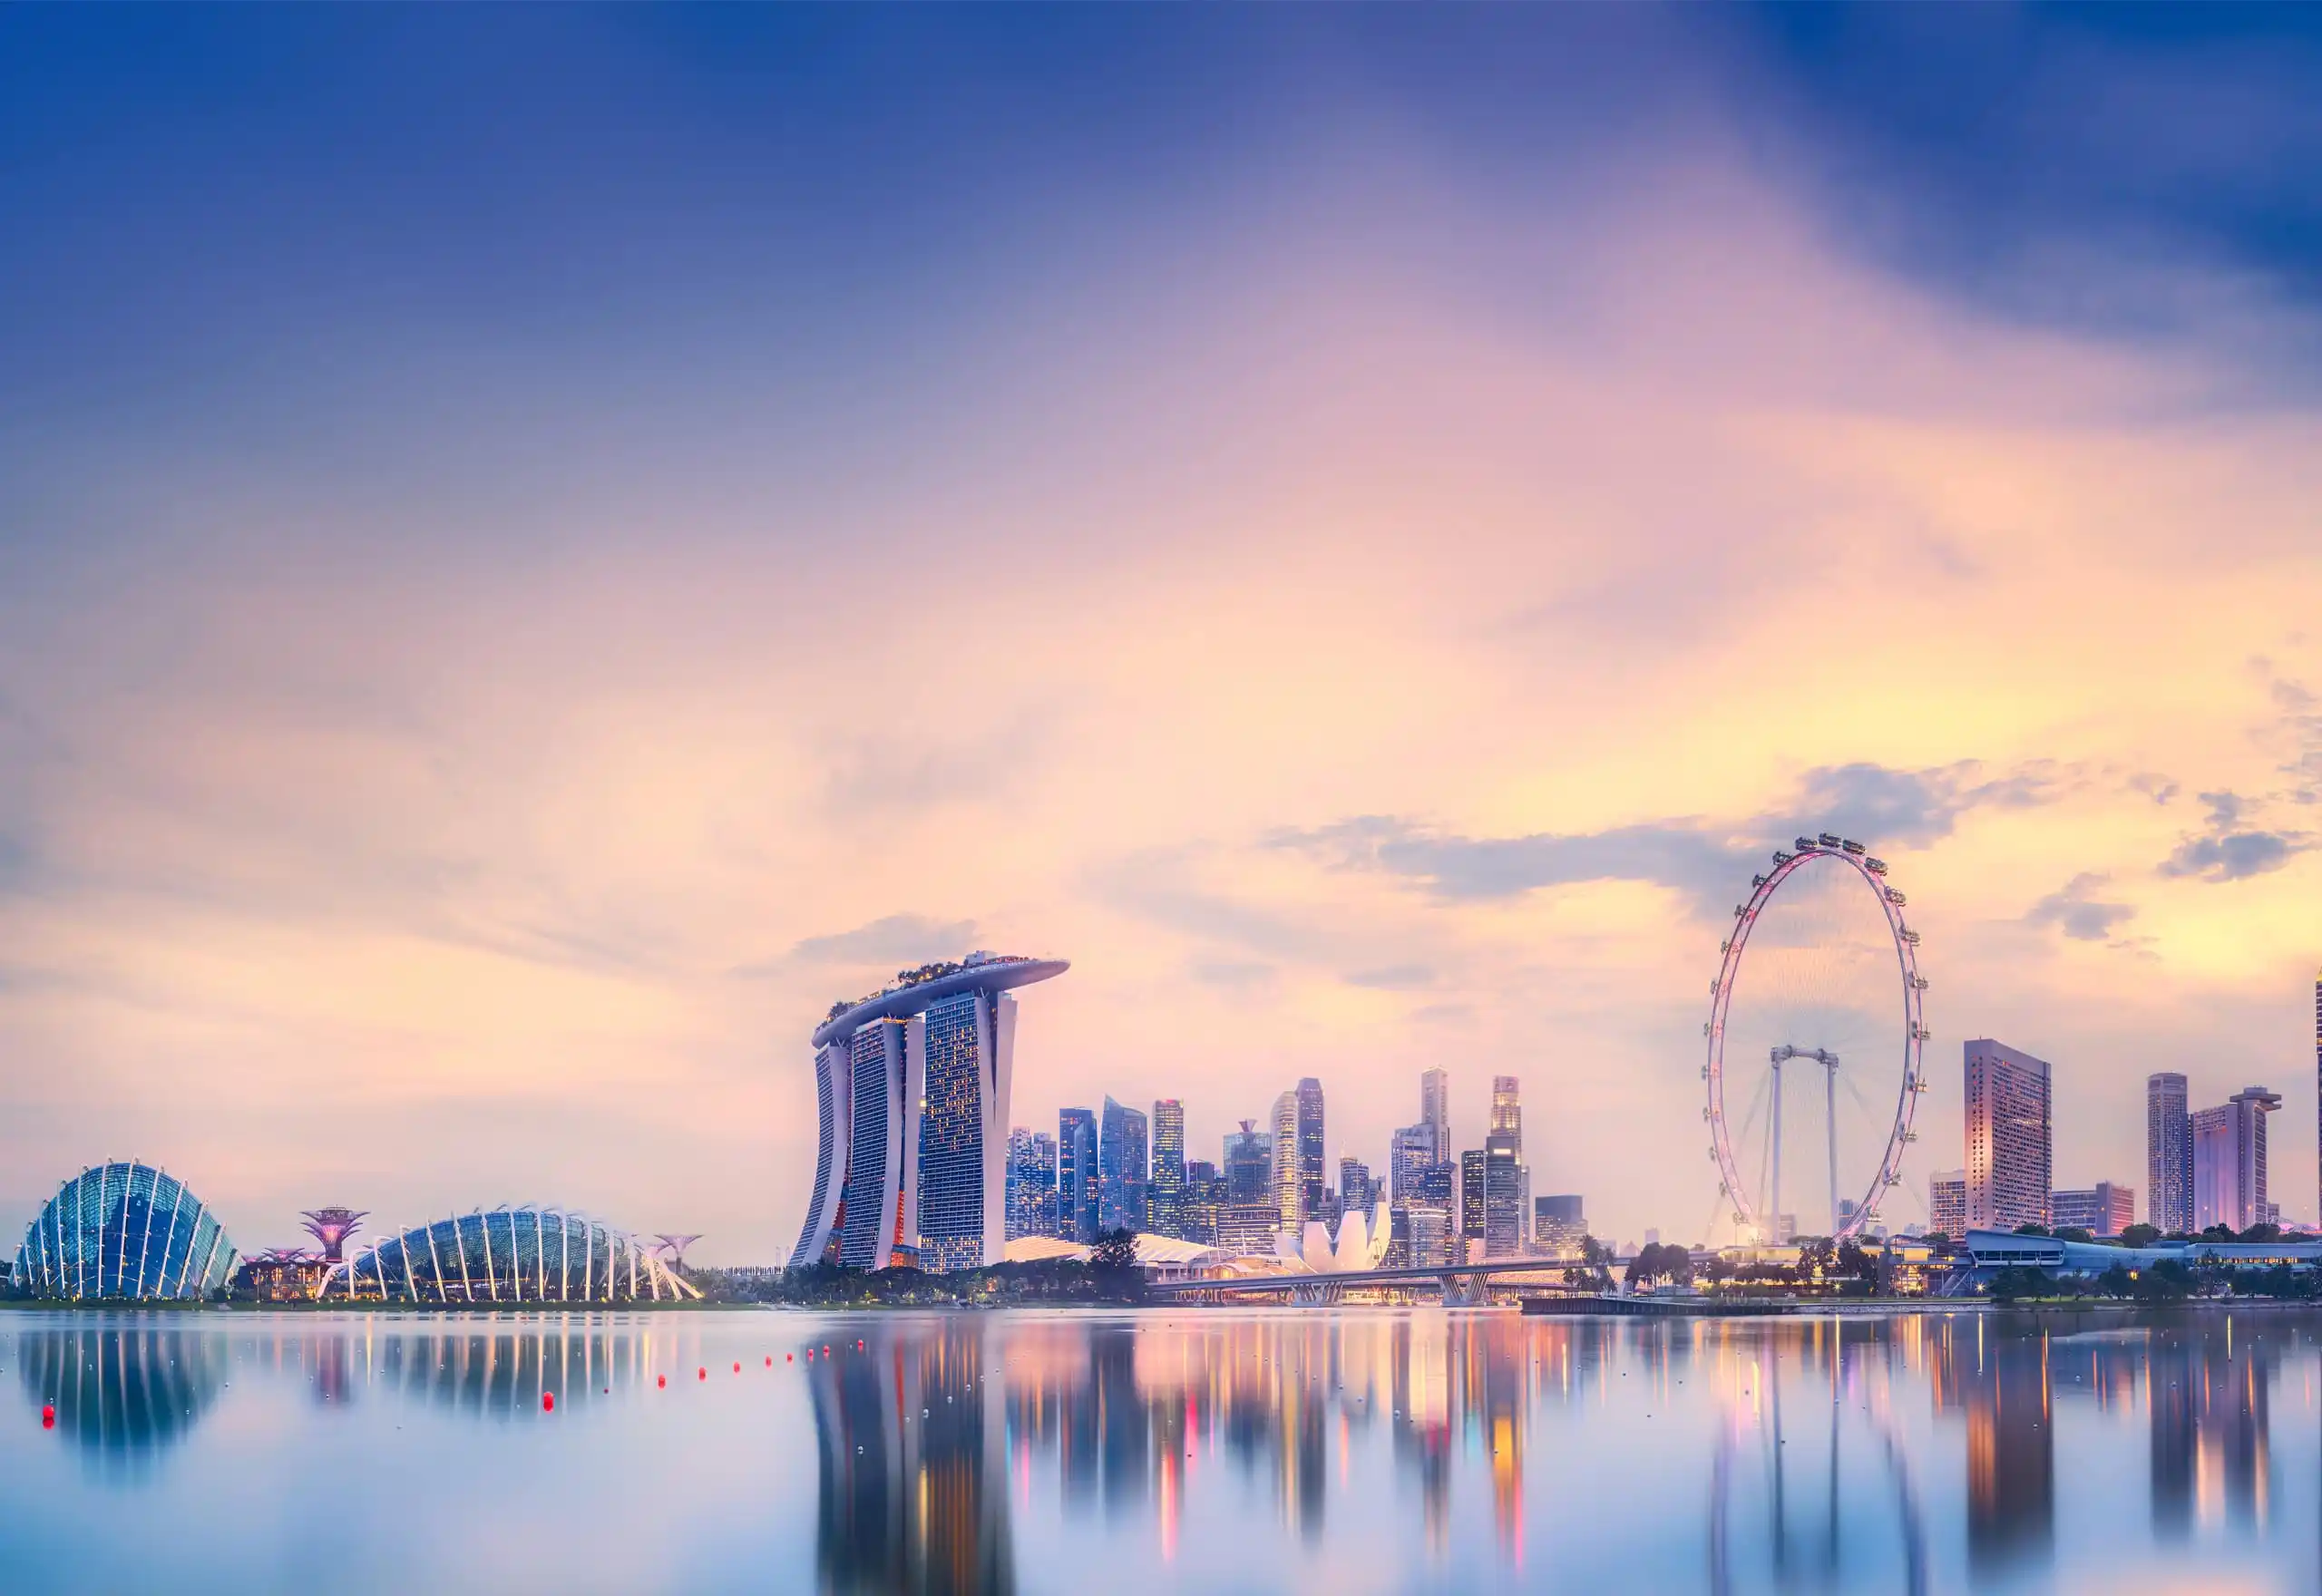 Secretarial and Administration Courses in Singapore